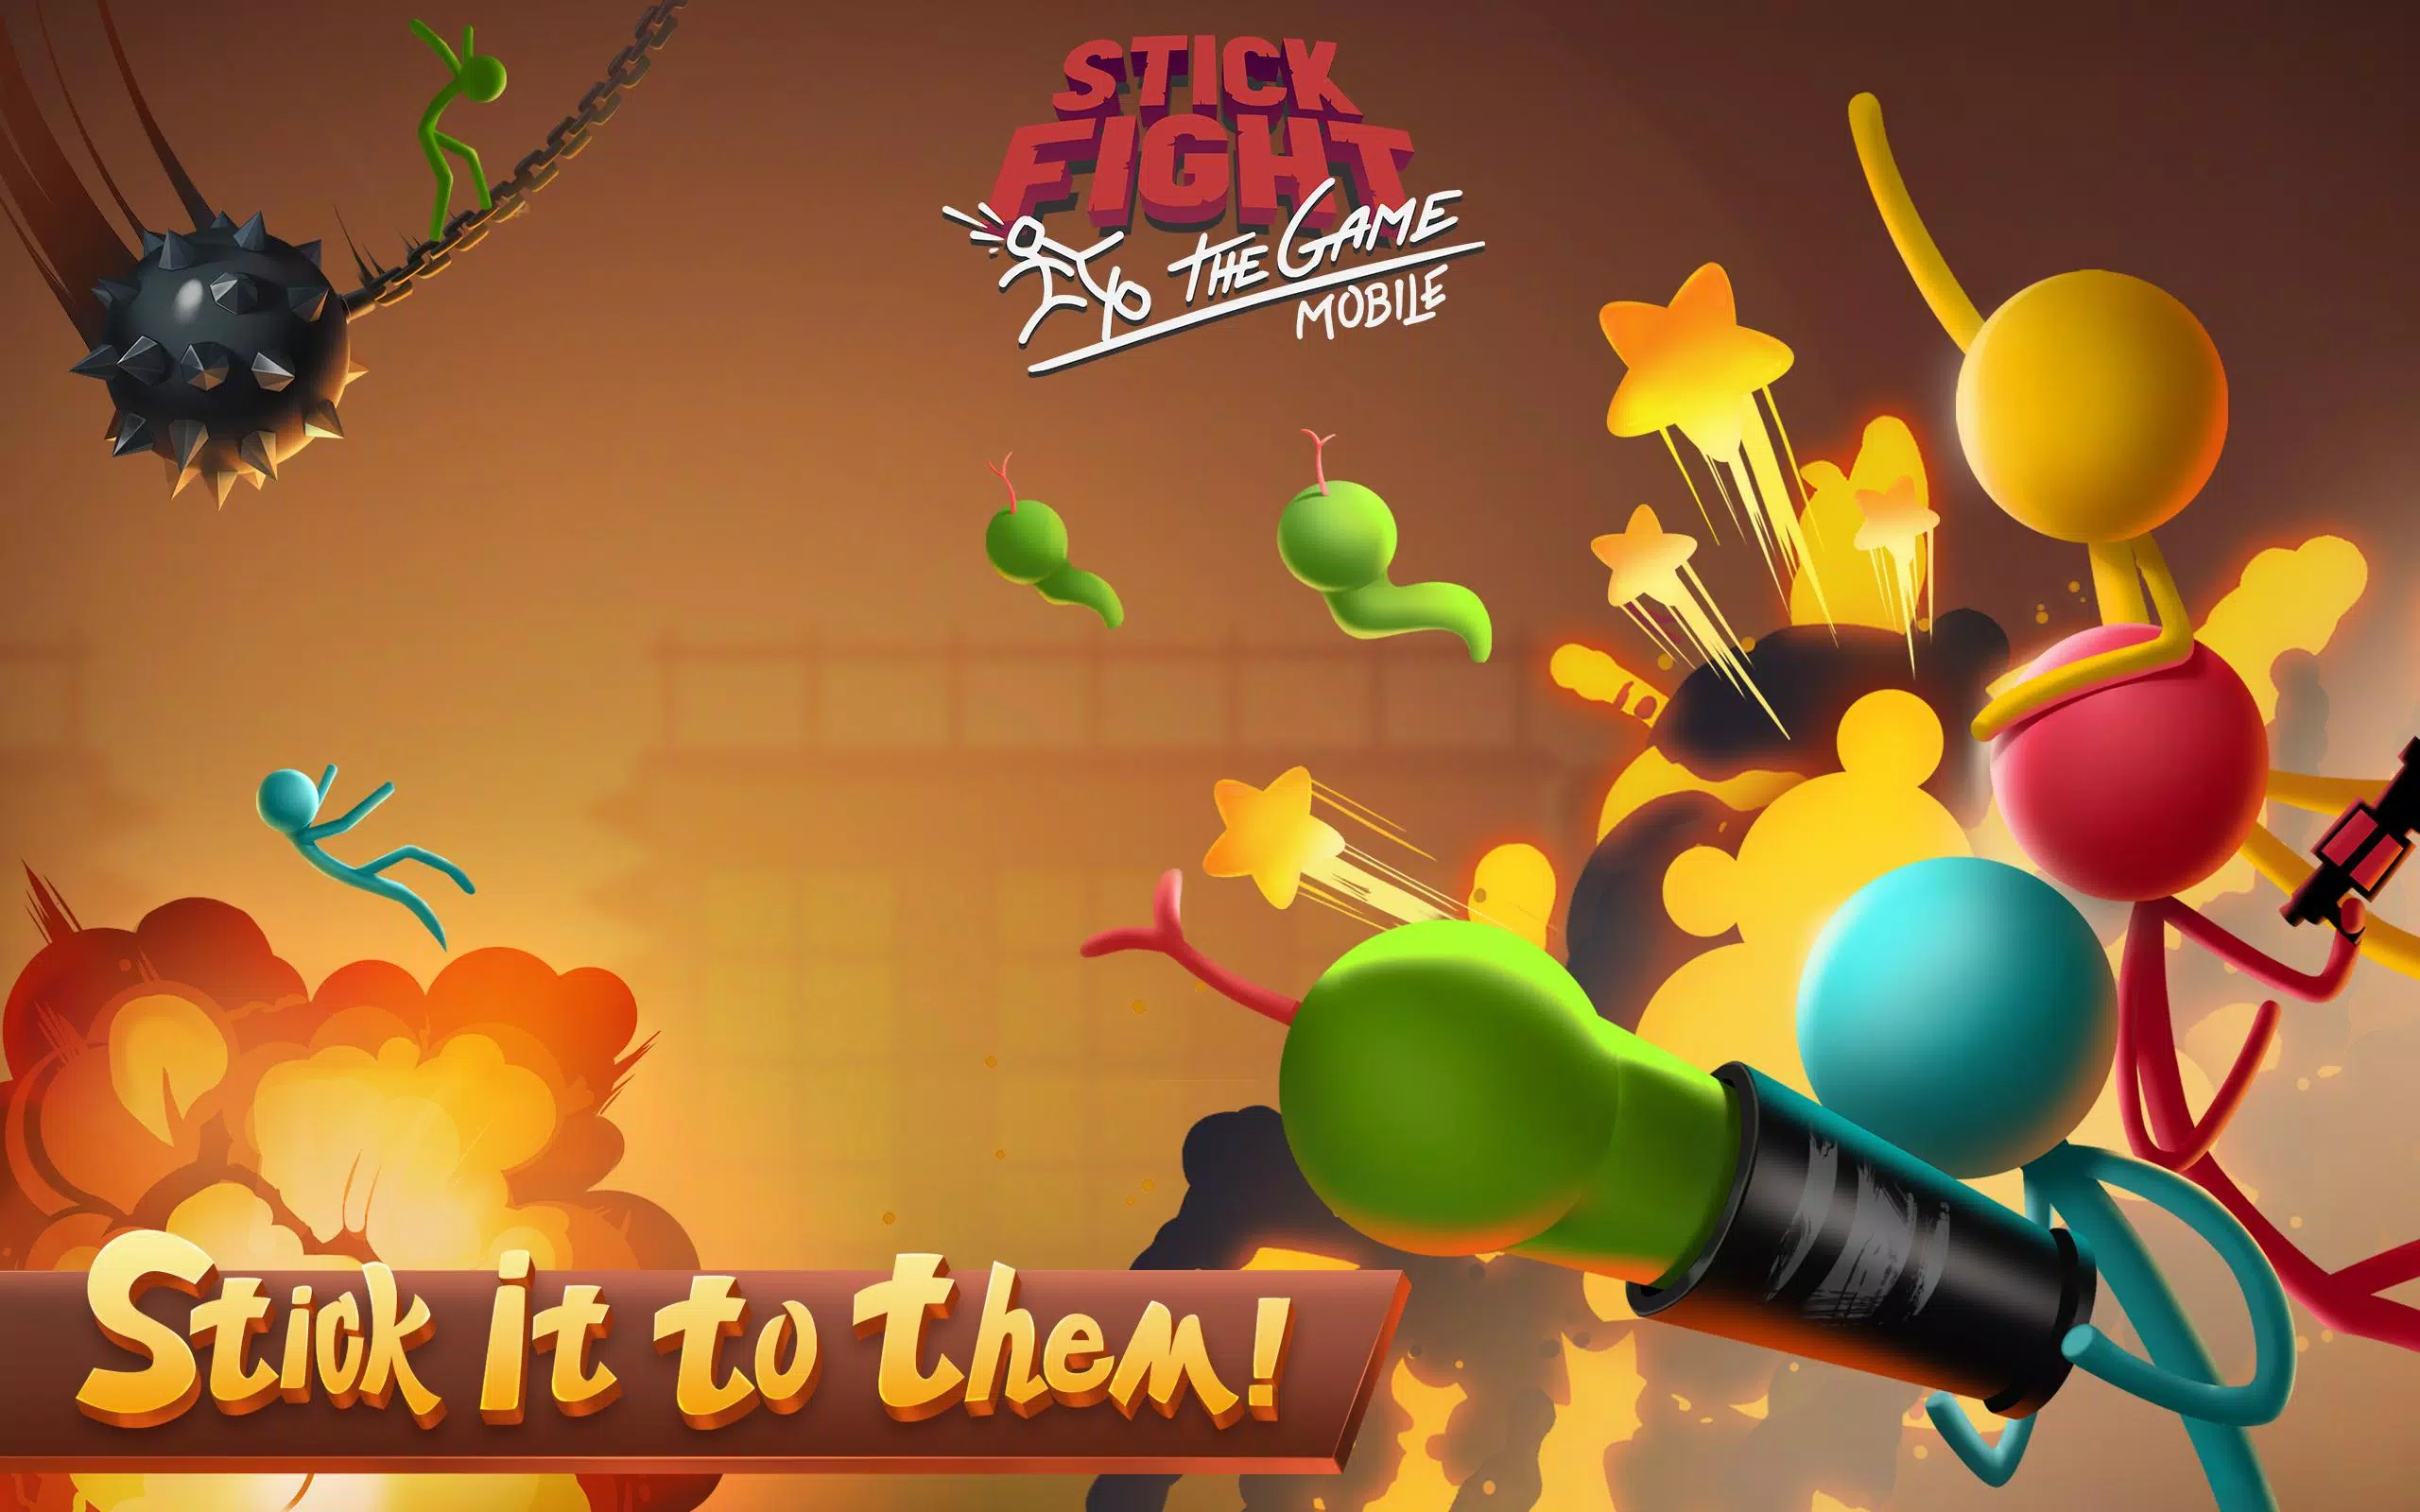 Stick Fight: The Game News and Videos